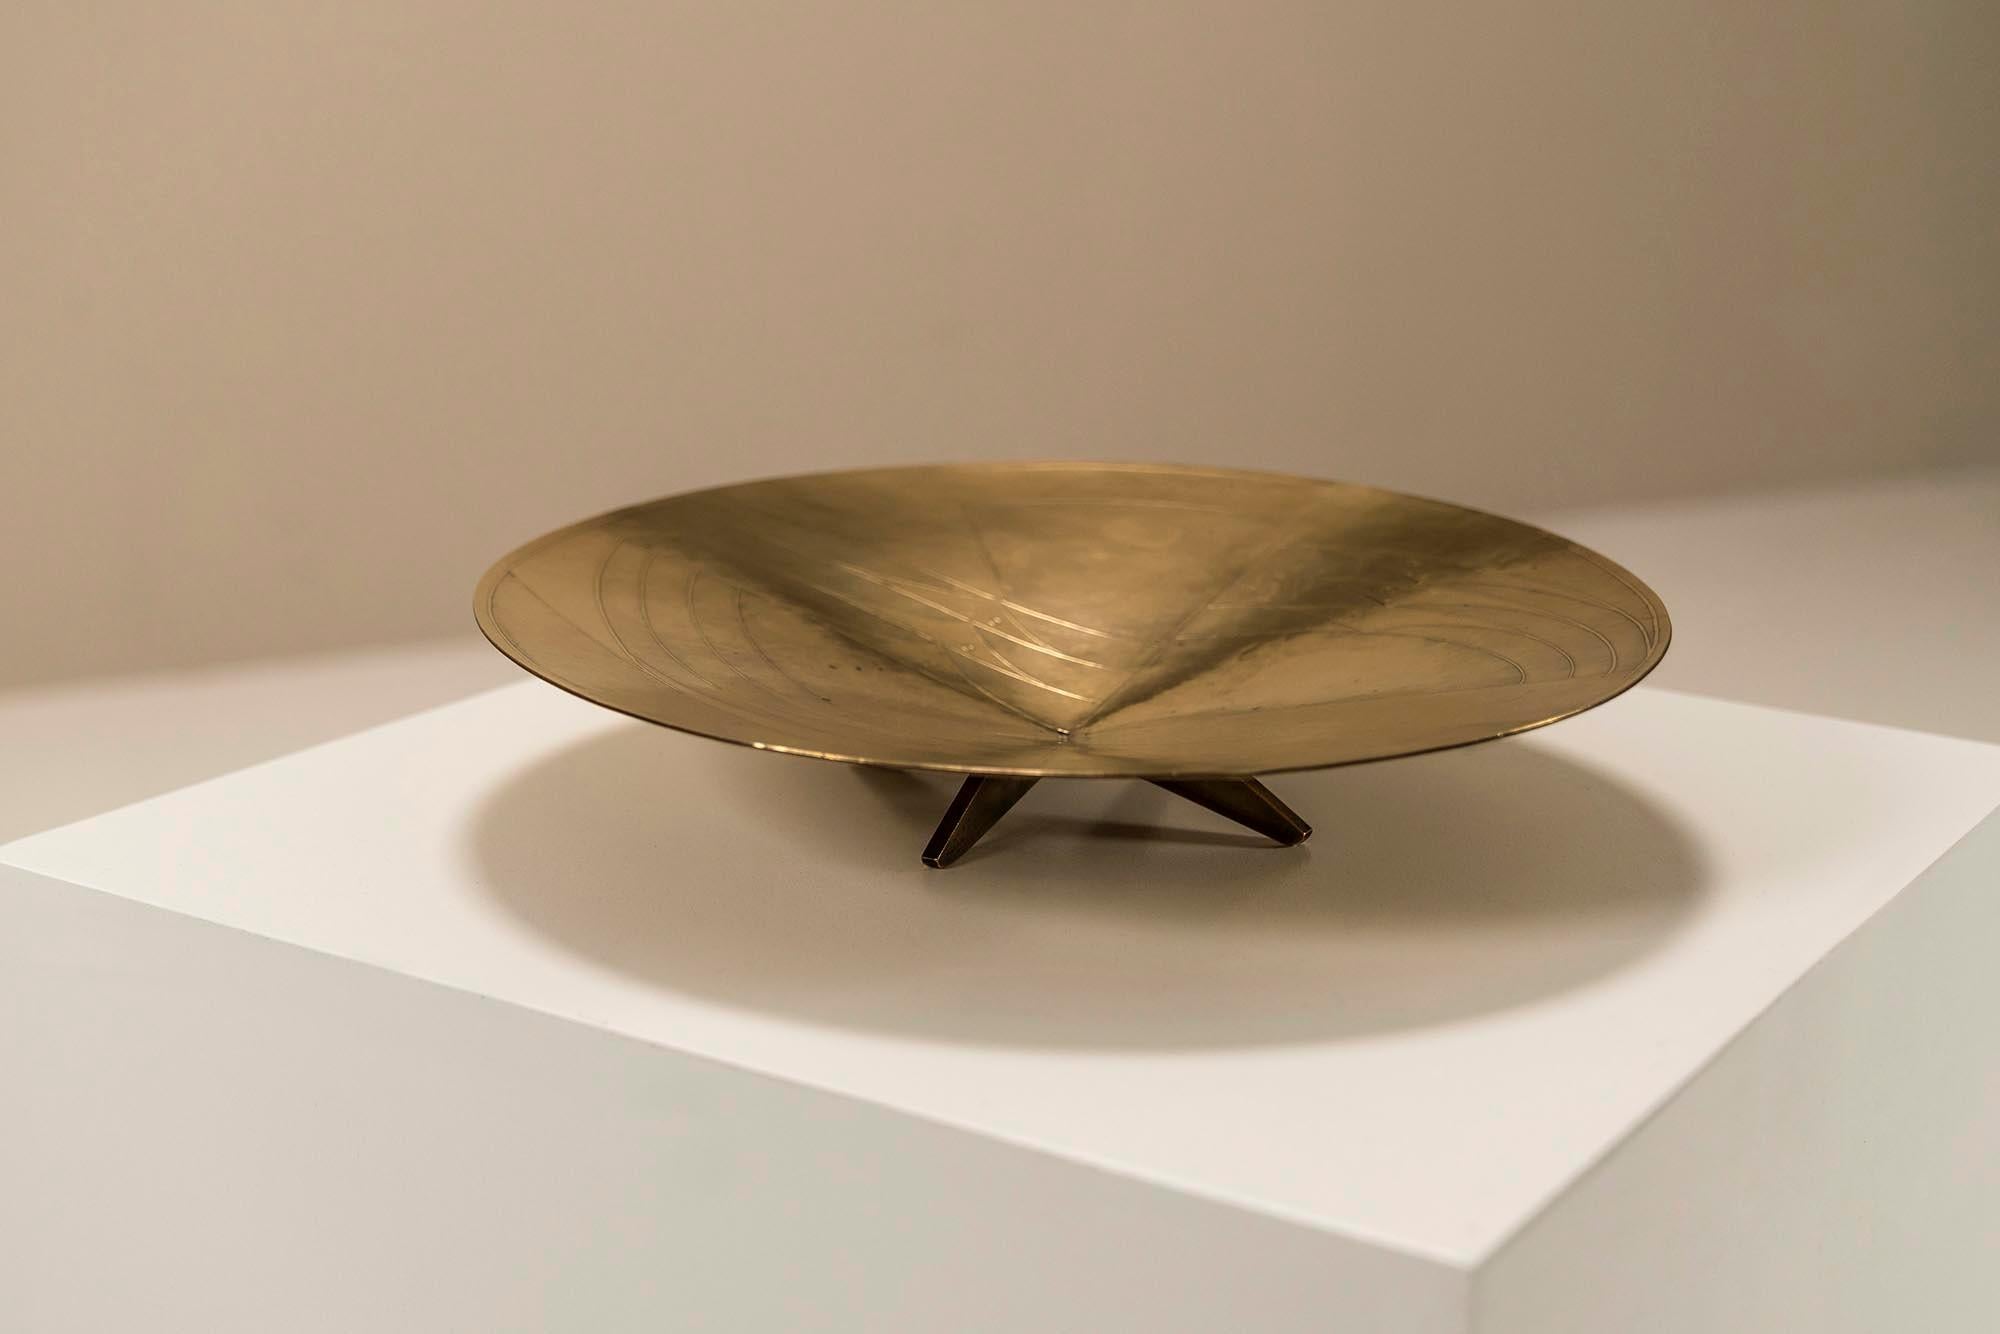 Abstract Decorated Bowl in Hammered Brass by Cris Agterberg, Netherlands 1934 2